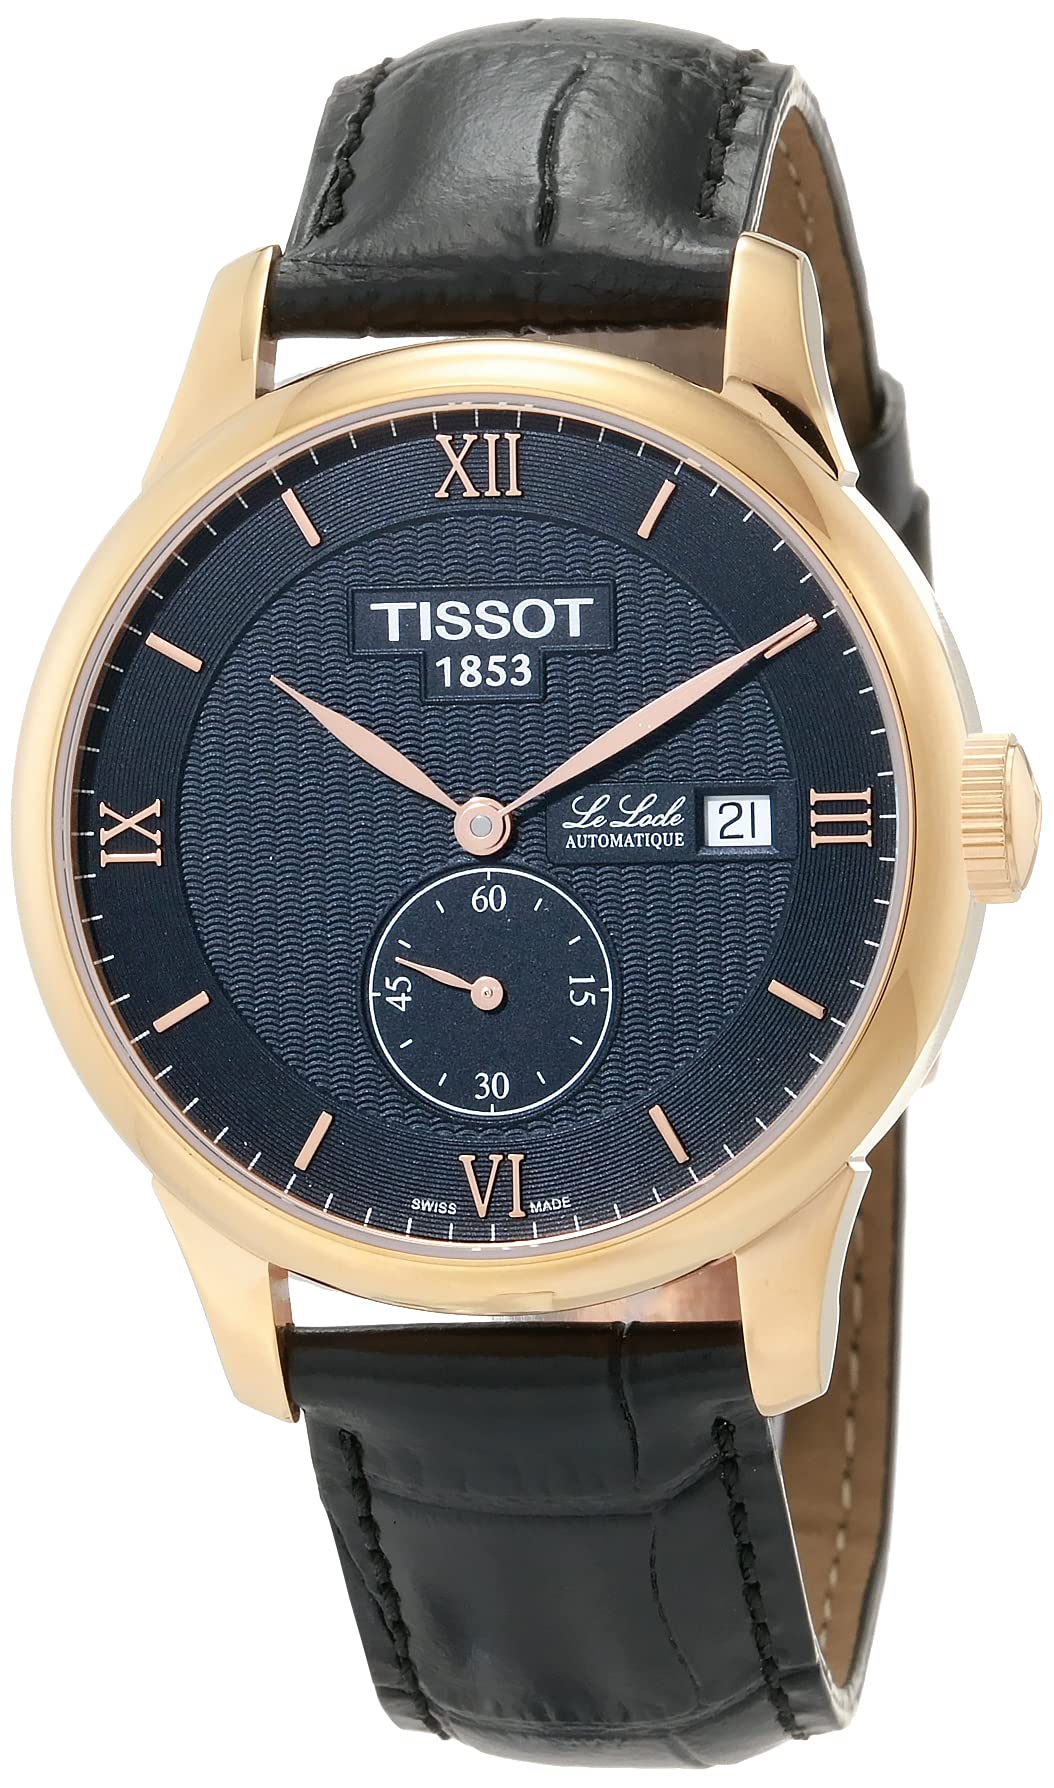 Tissot Mens Le Locle Automatic Petite Seconde 316L Stainless Steel case with Rose Gold PVD Coating Automatic Watch, Black, Leather, 19 (T0064283605801)